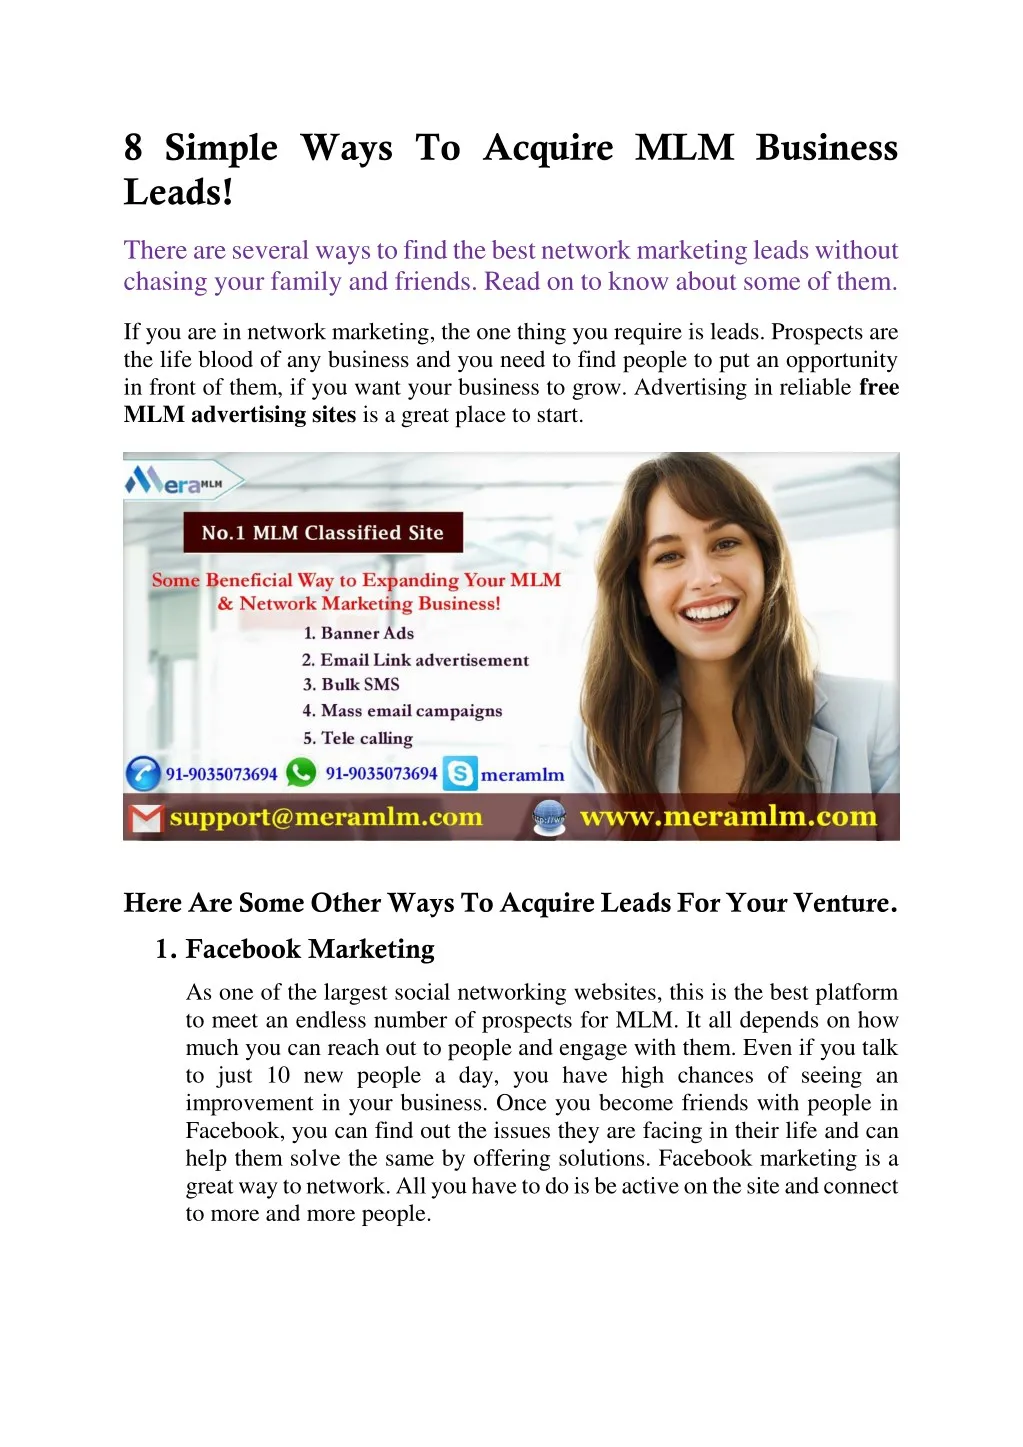 8 simple ways to acquire mlm business leads